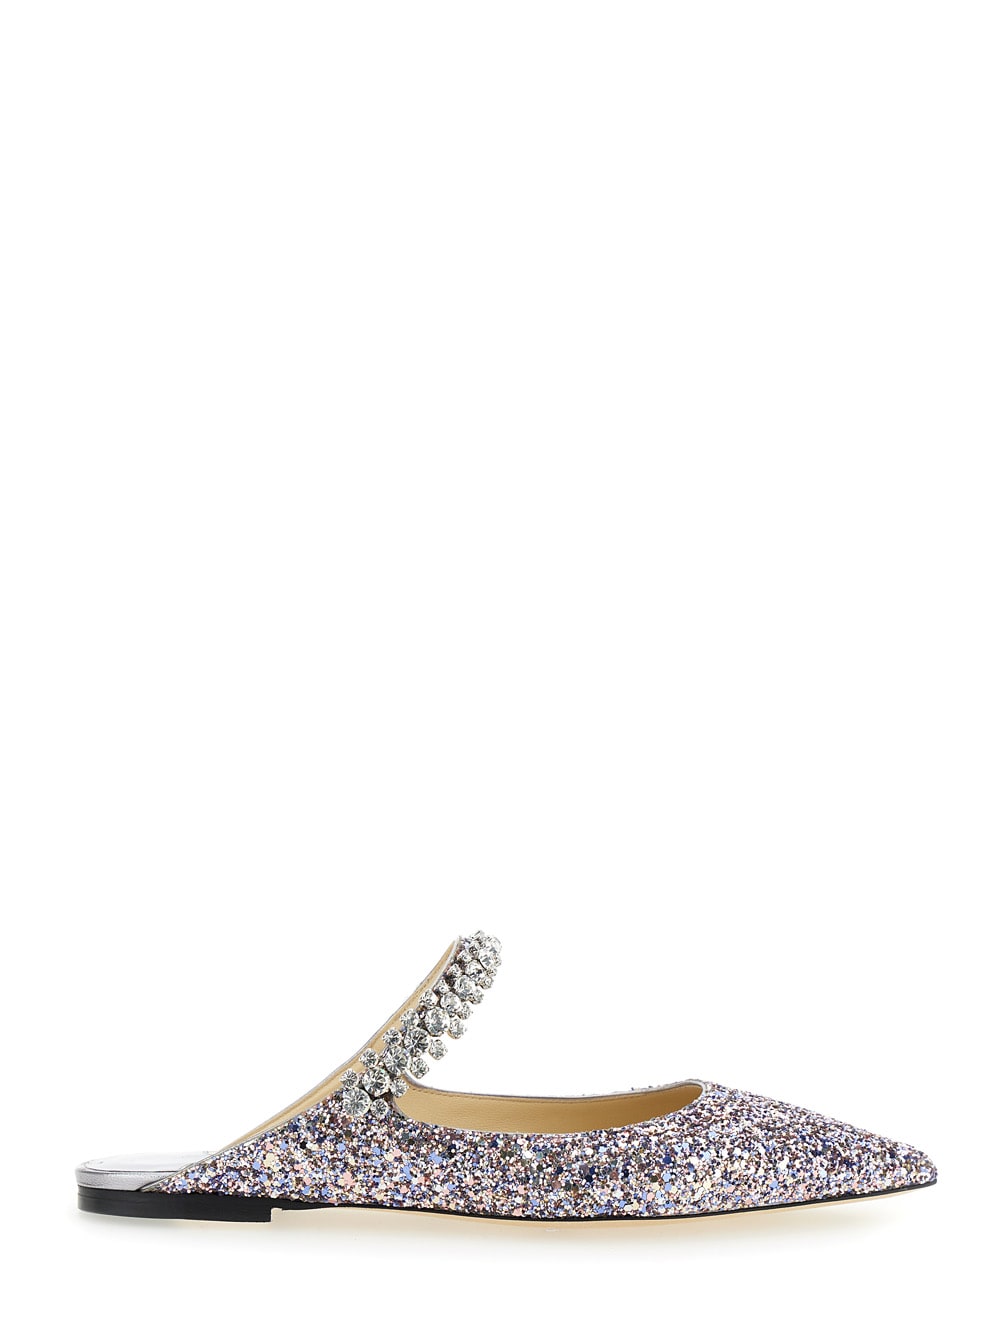 bling Flat Multicolor Mules With Crystal Strap In Glitter Fabric Woman